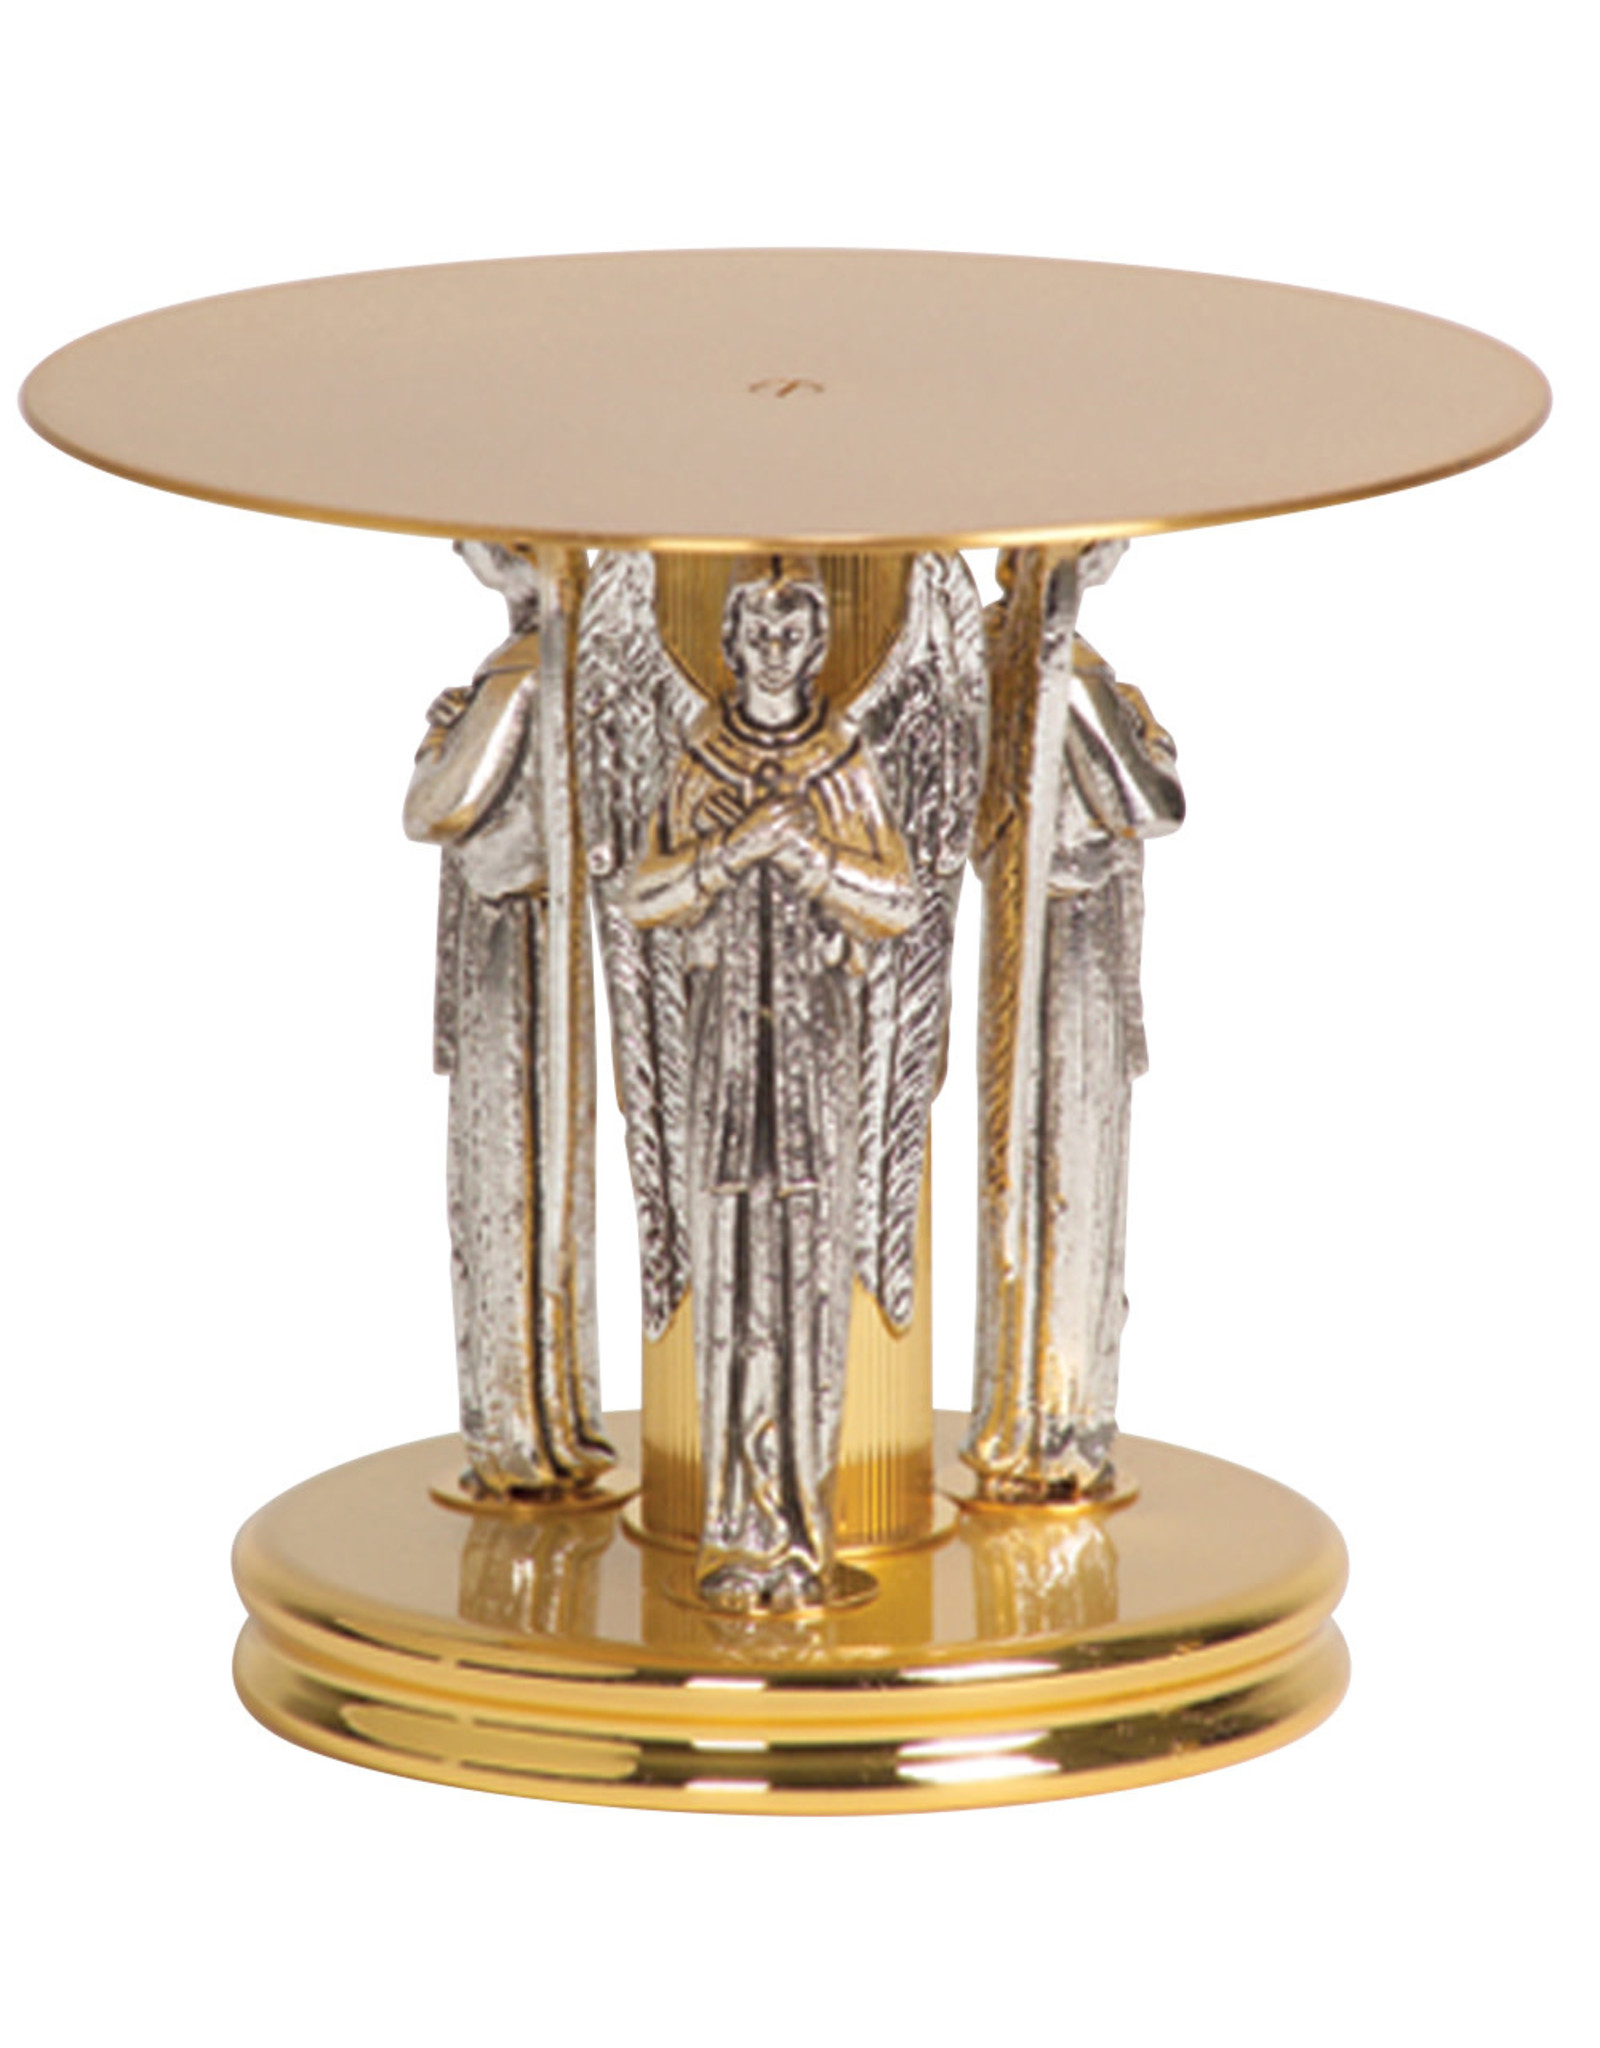 Thabor (Pedestal) with Three Silver Plated Angels